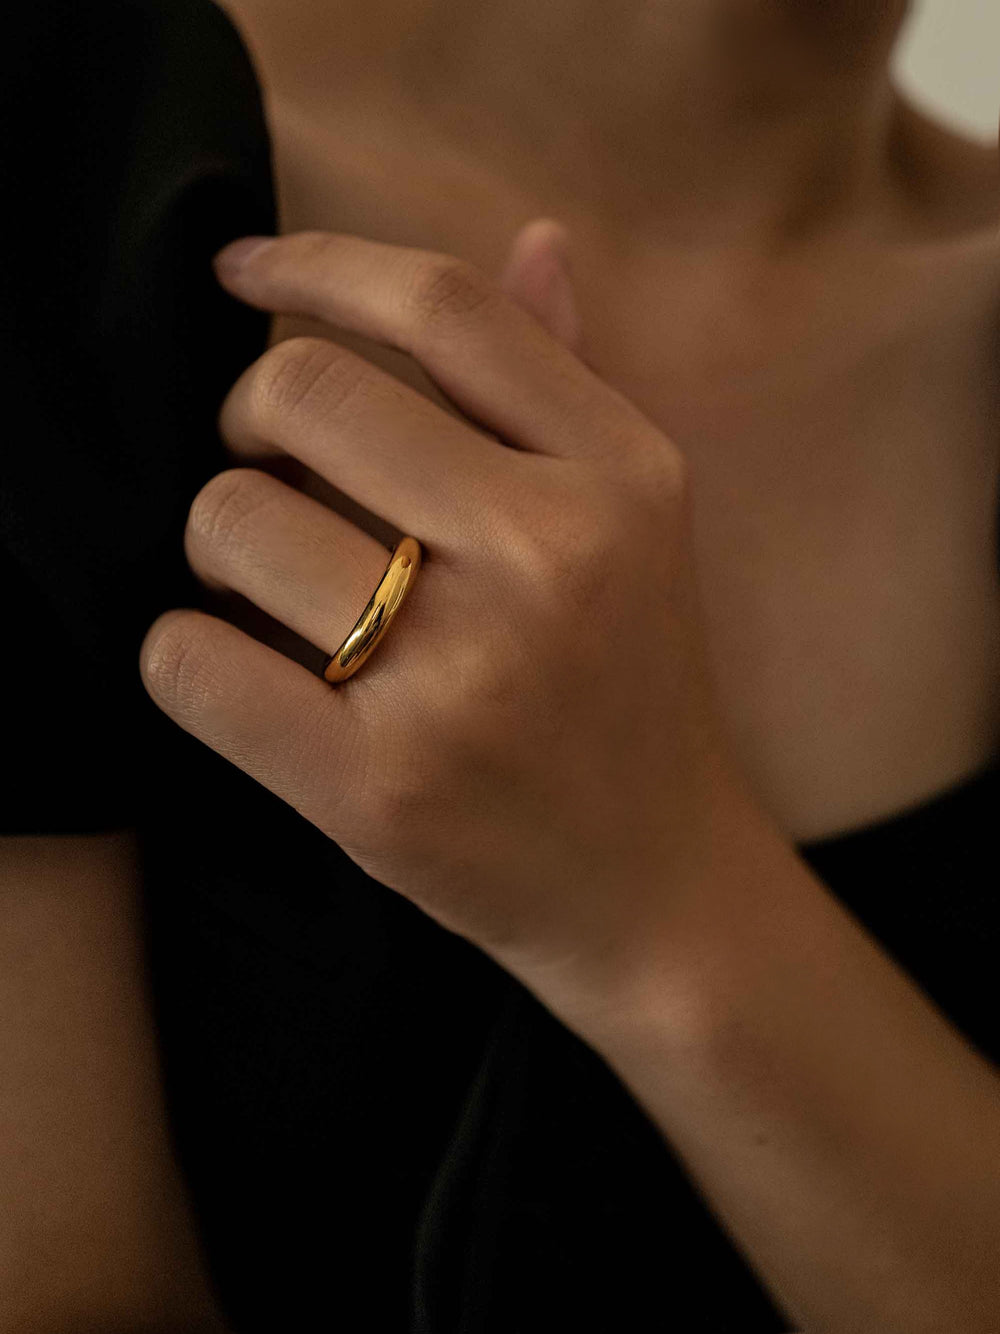 A polished gold ring.